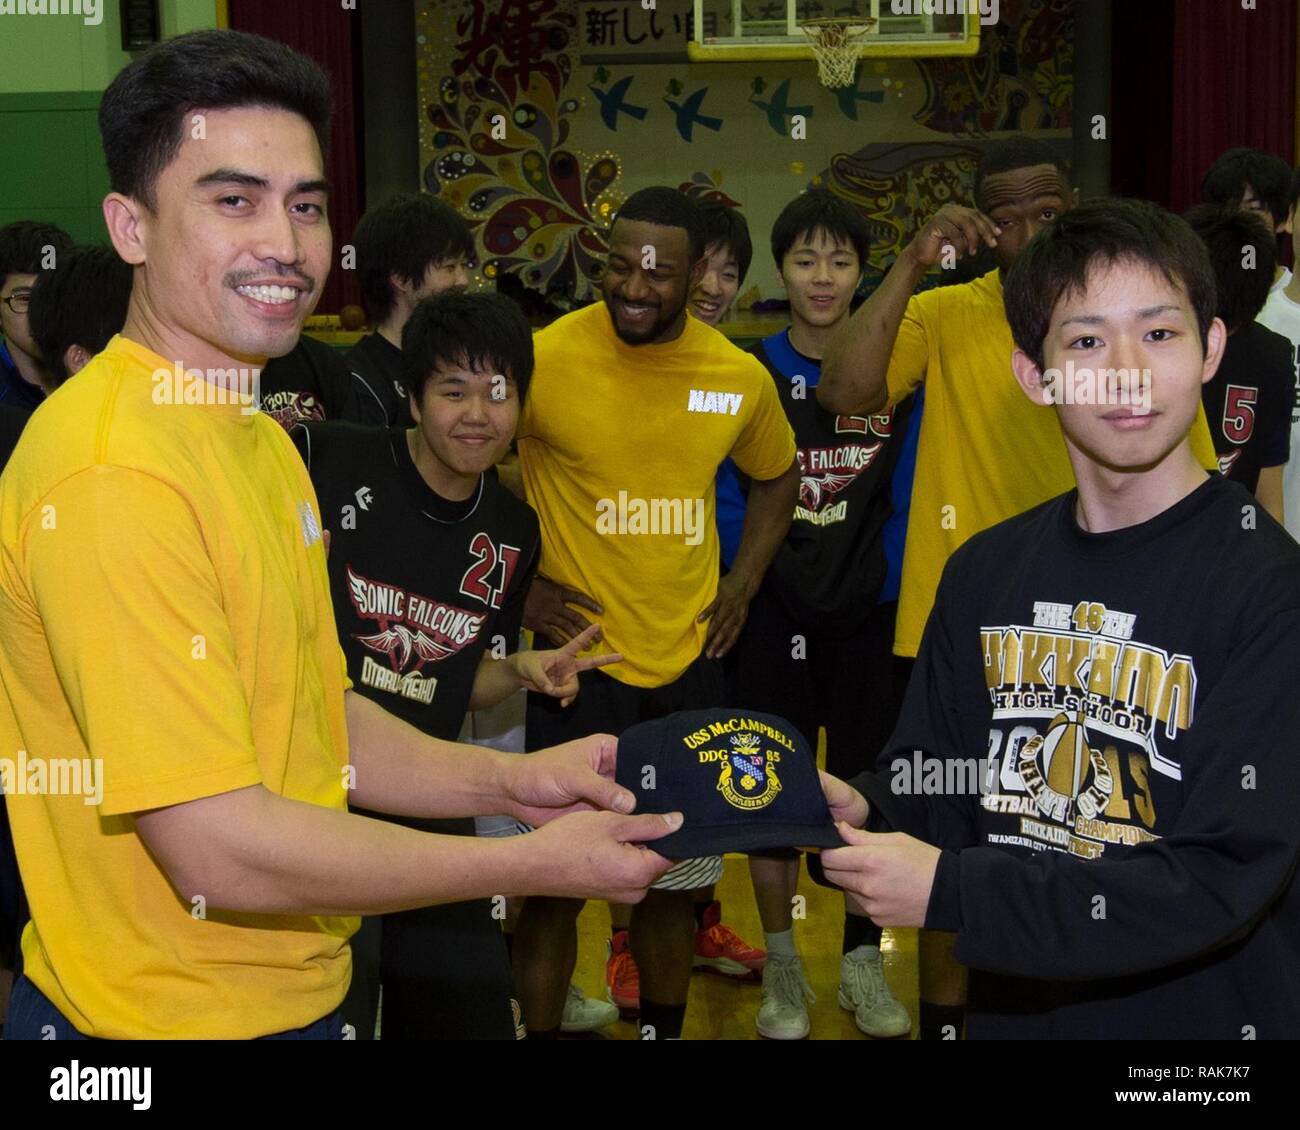 OTARU, Japan (Feb. 05, 2017) Ship’s Serviceman 1st Class Michel Tolentino, assigned to the forward-deployed Arleigh Burke-class guided-missile destroyer USS McCampbell (DDG 85), exchanges gifts with Yuma Mizoguchi from the Meiho High School basketball team while visiting Otaru, Japan. McCampbell is on patrol in the 7th Fleet area of operations in support of security and stability in the Indo-Asia-Pacific region. Stock Photo